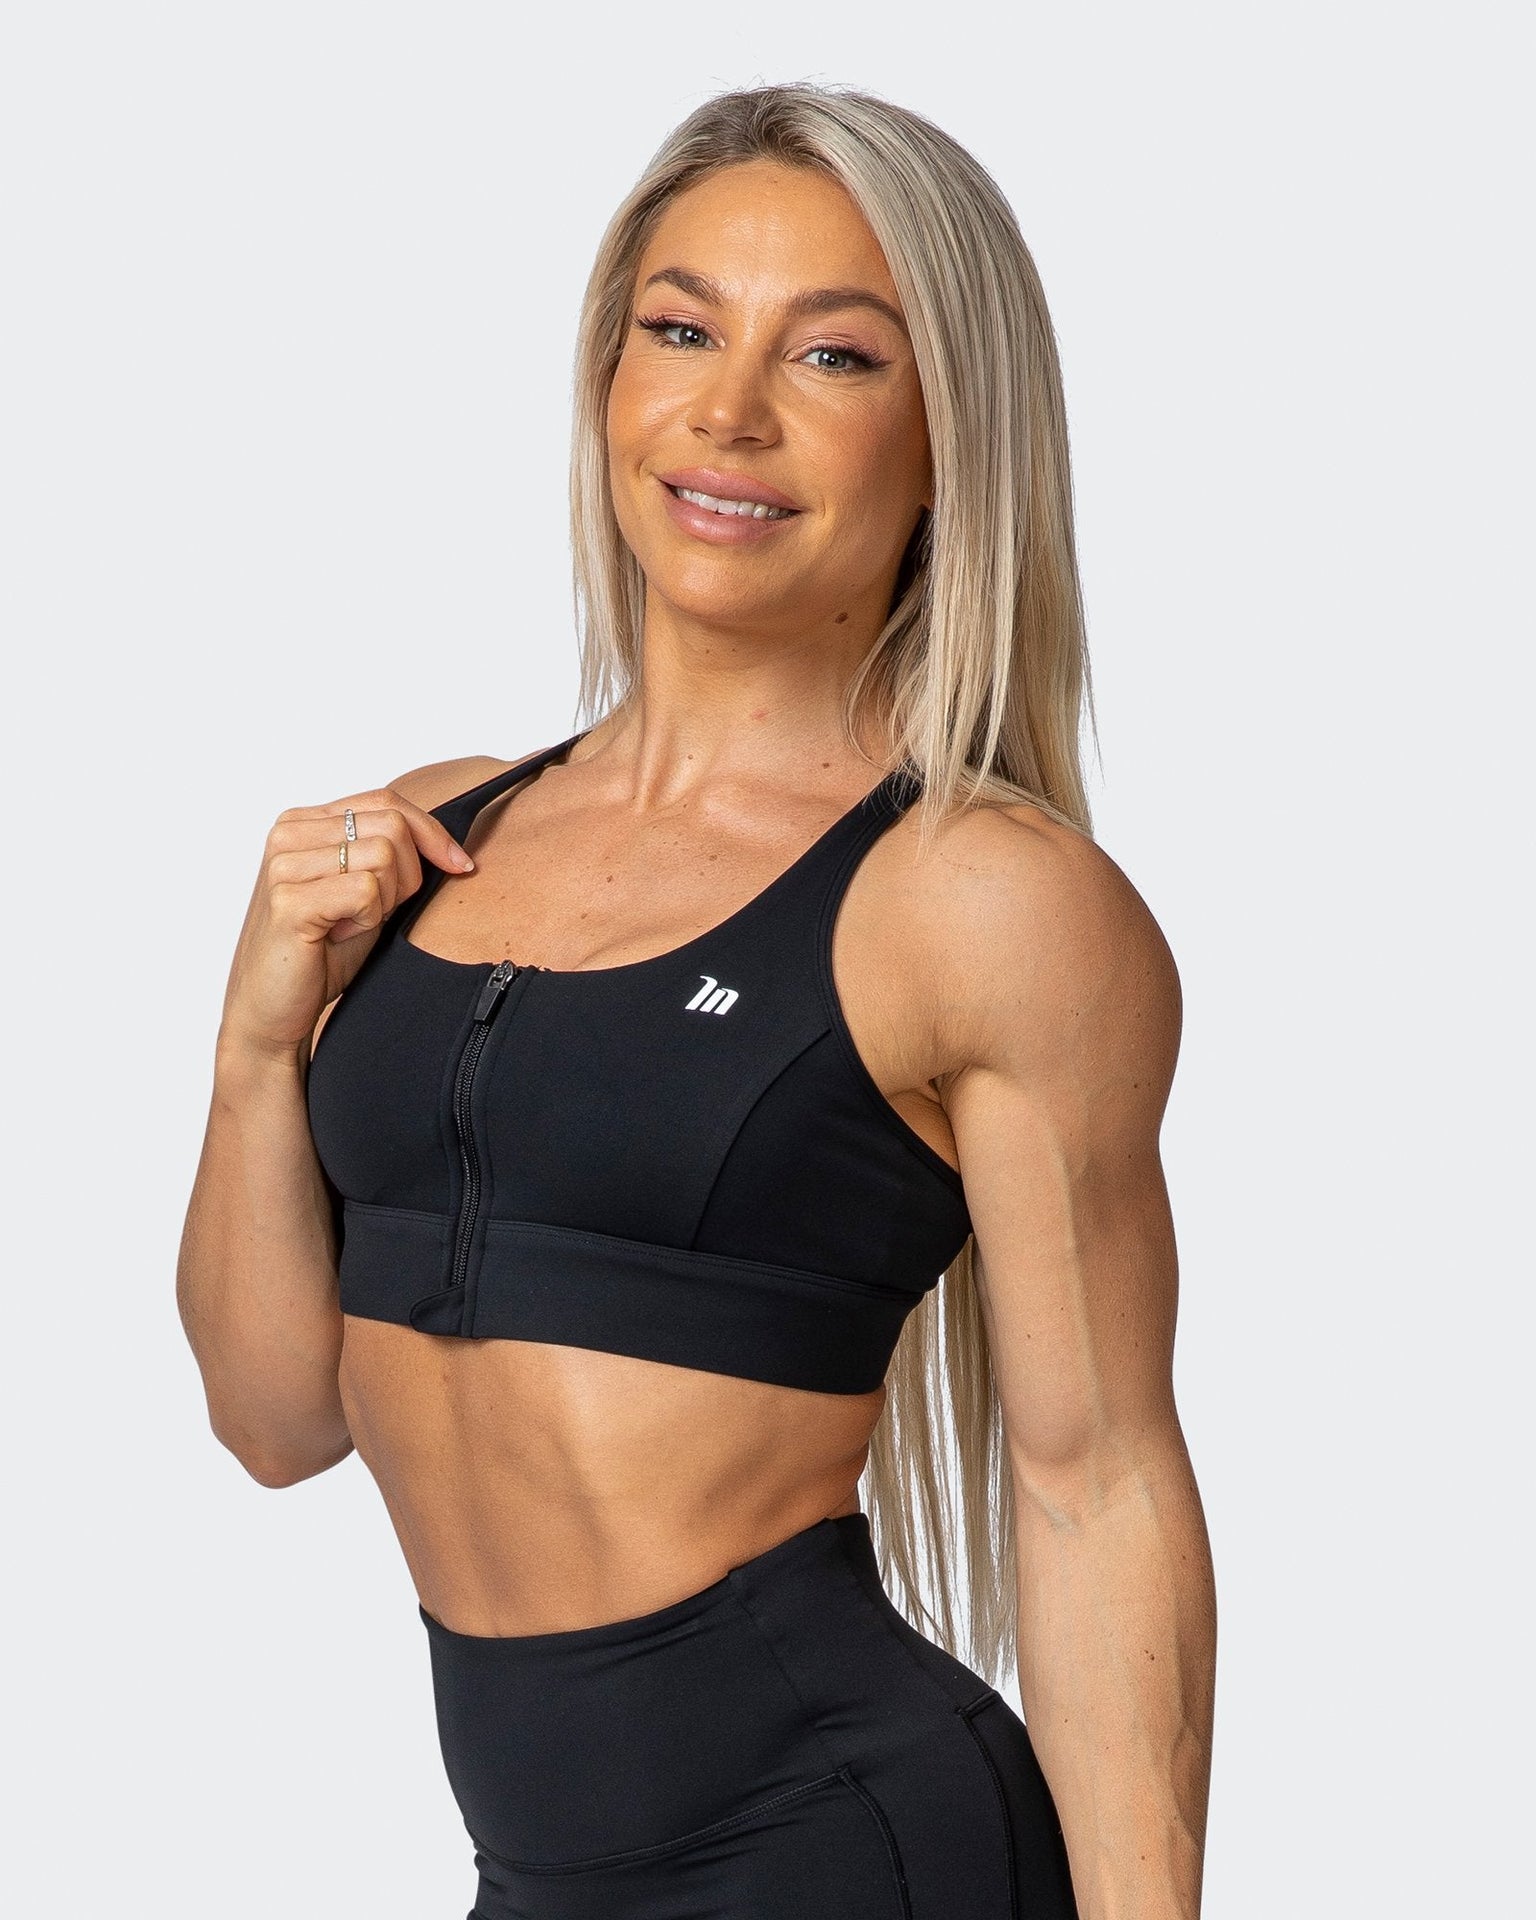 Bounce Defence Bra - Black - Muscle Nation